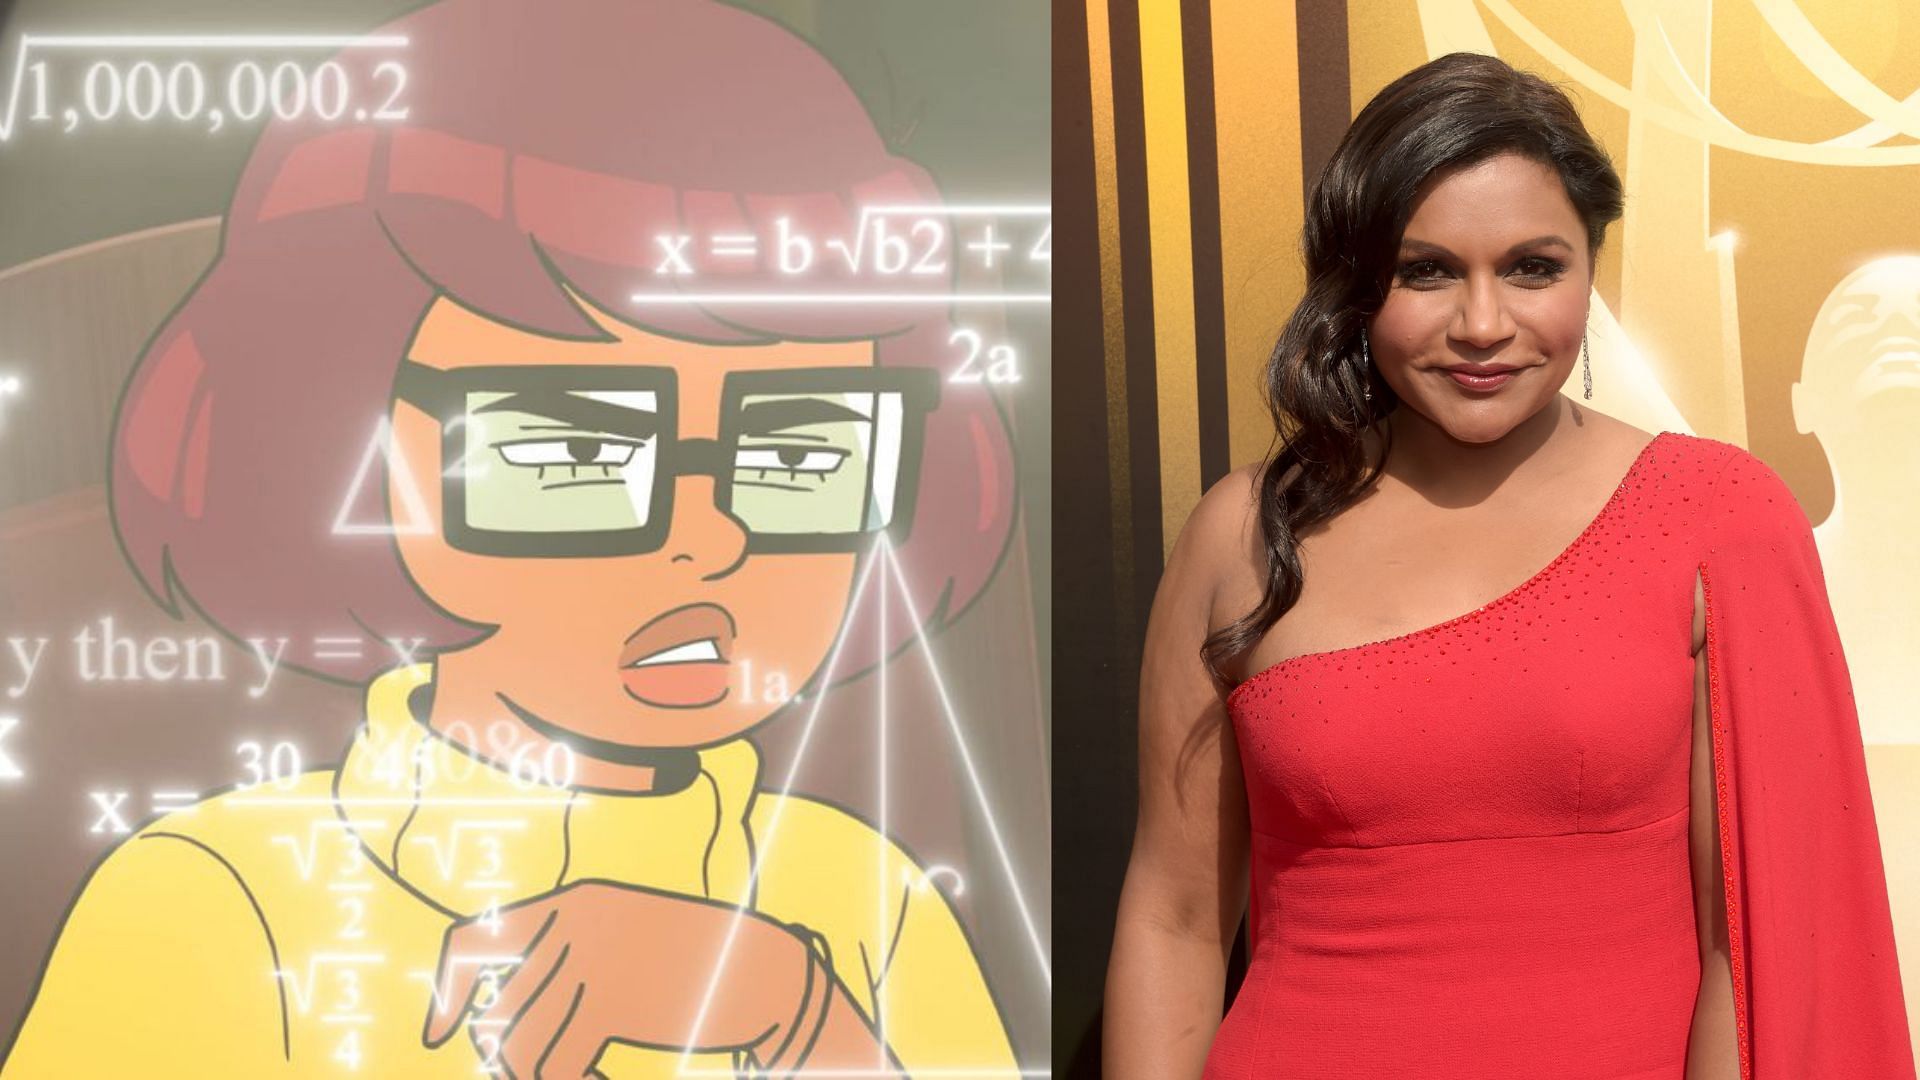 Mindy Kaling's Velma Is Asian, White People Are NOT Okay